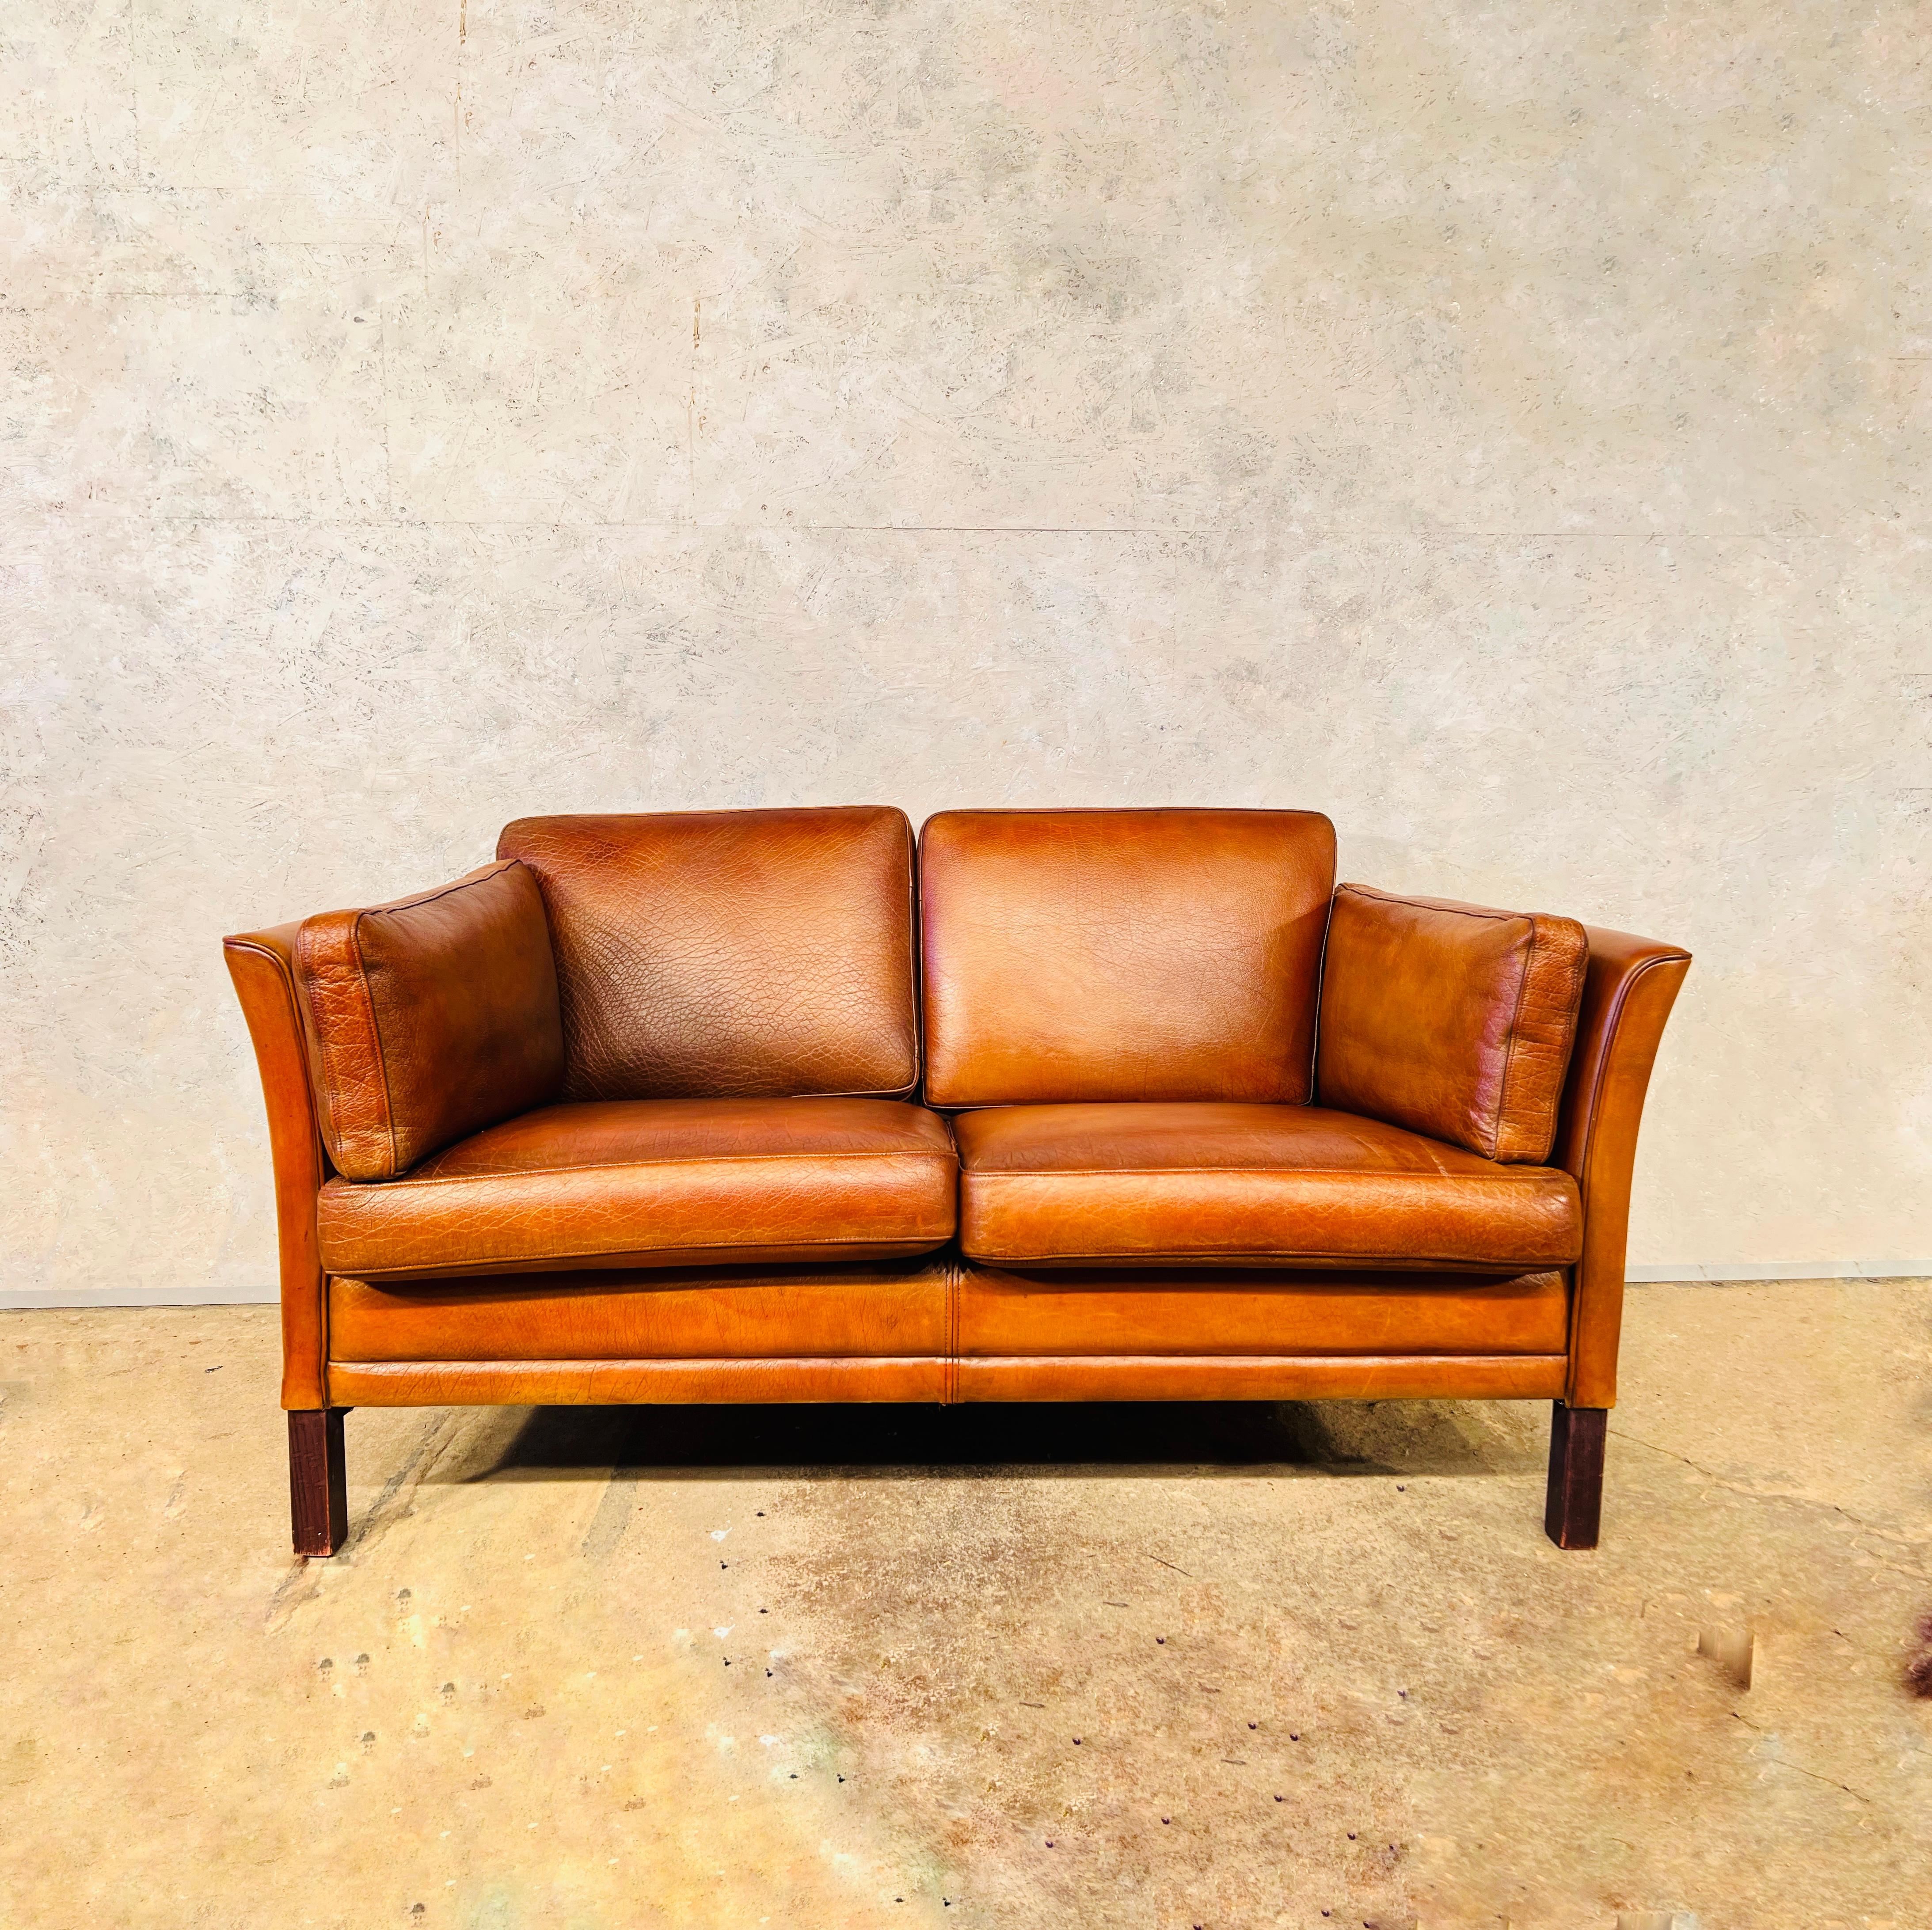 A Stylish Danish 1970s Sofa designed by Mogens Hansen, great design with beautiful lines, sits wonderfully.

Stunning hand dyed tan colour, great patina and finish.

Viewings welcome at our showroom in Lewes, East Sussex, UK.